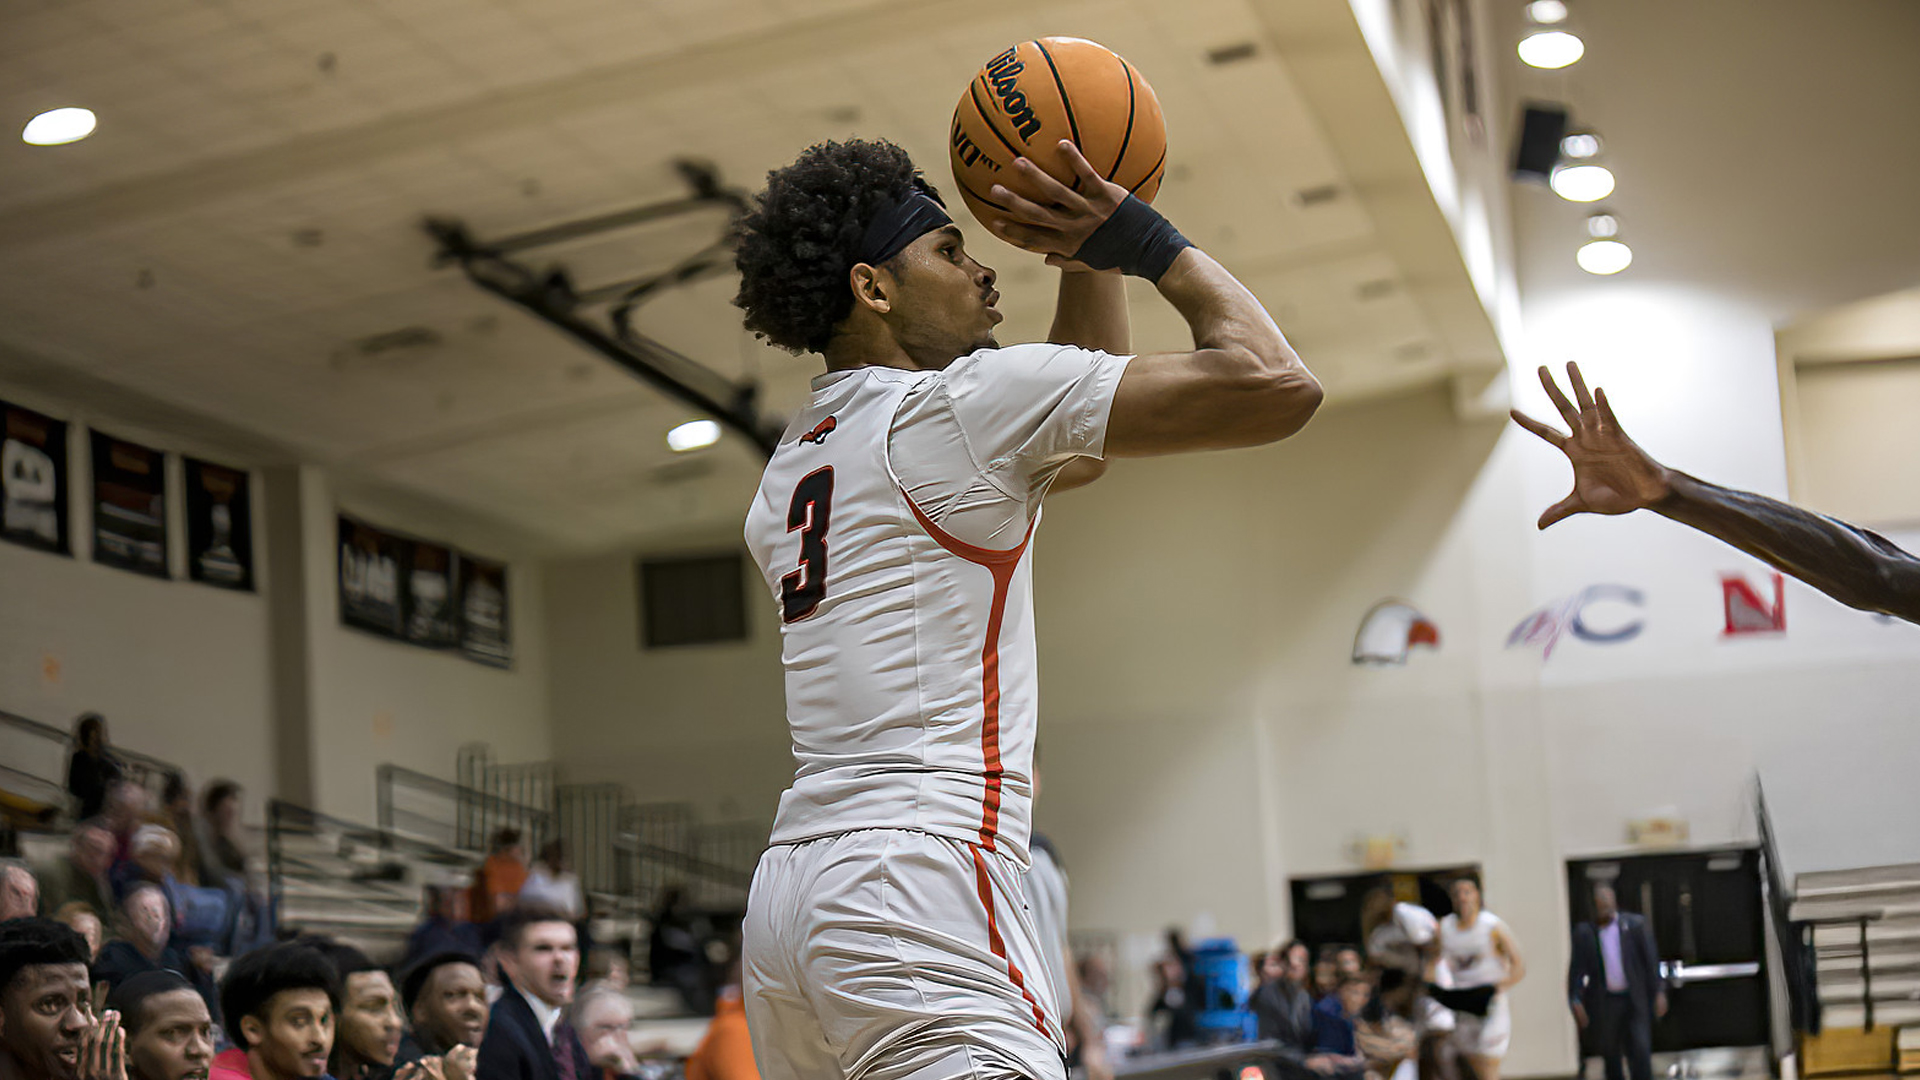 James West IV scored 24 points in Tusculum's season-opening win over USC Aiken (photo by Chuck Williams)